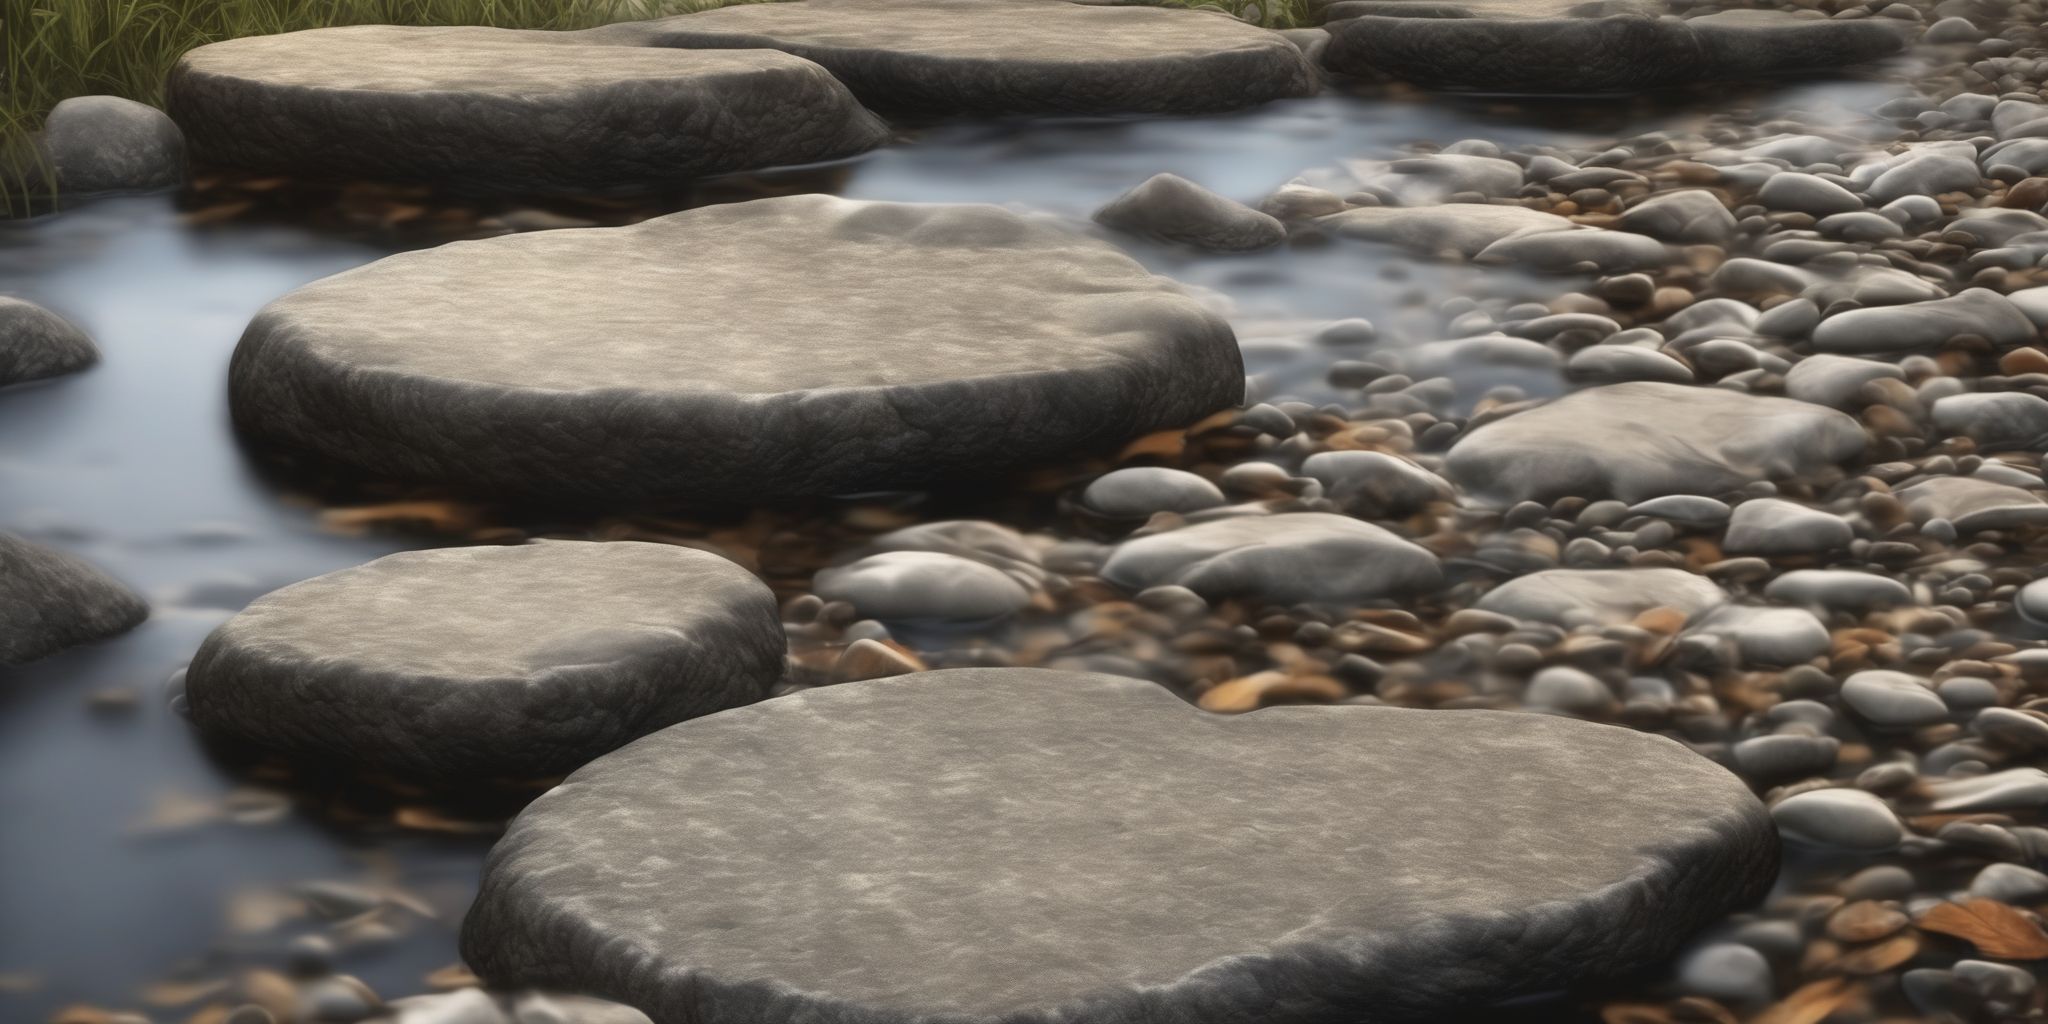 Stepping stones  in realistic, photographic style